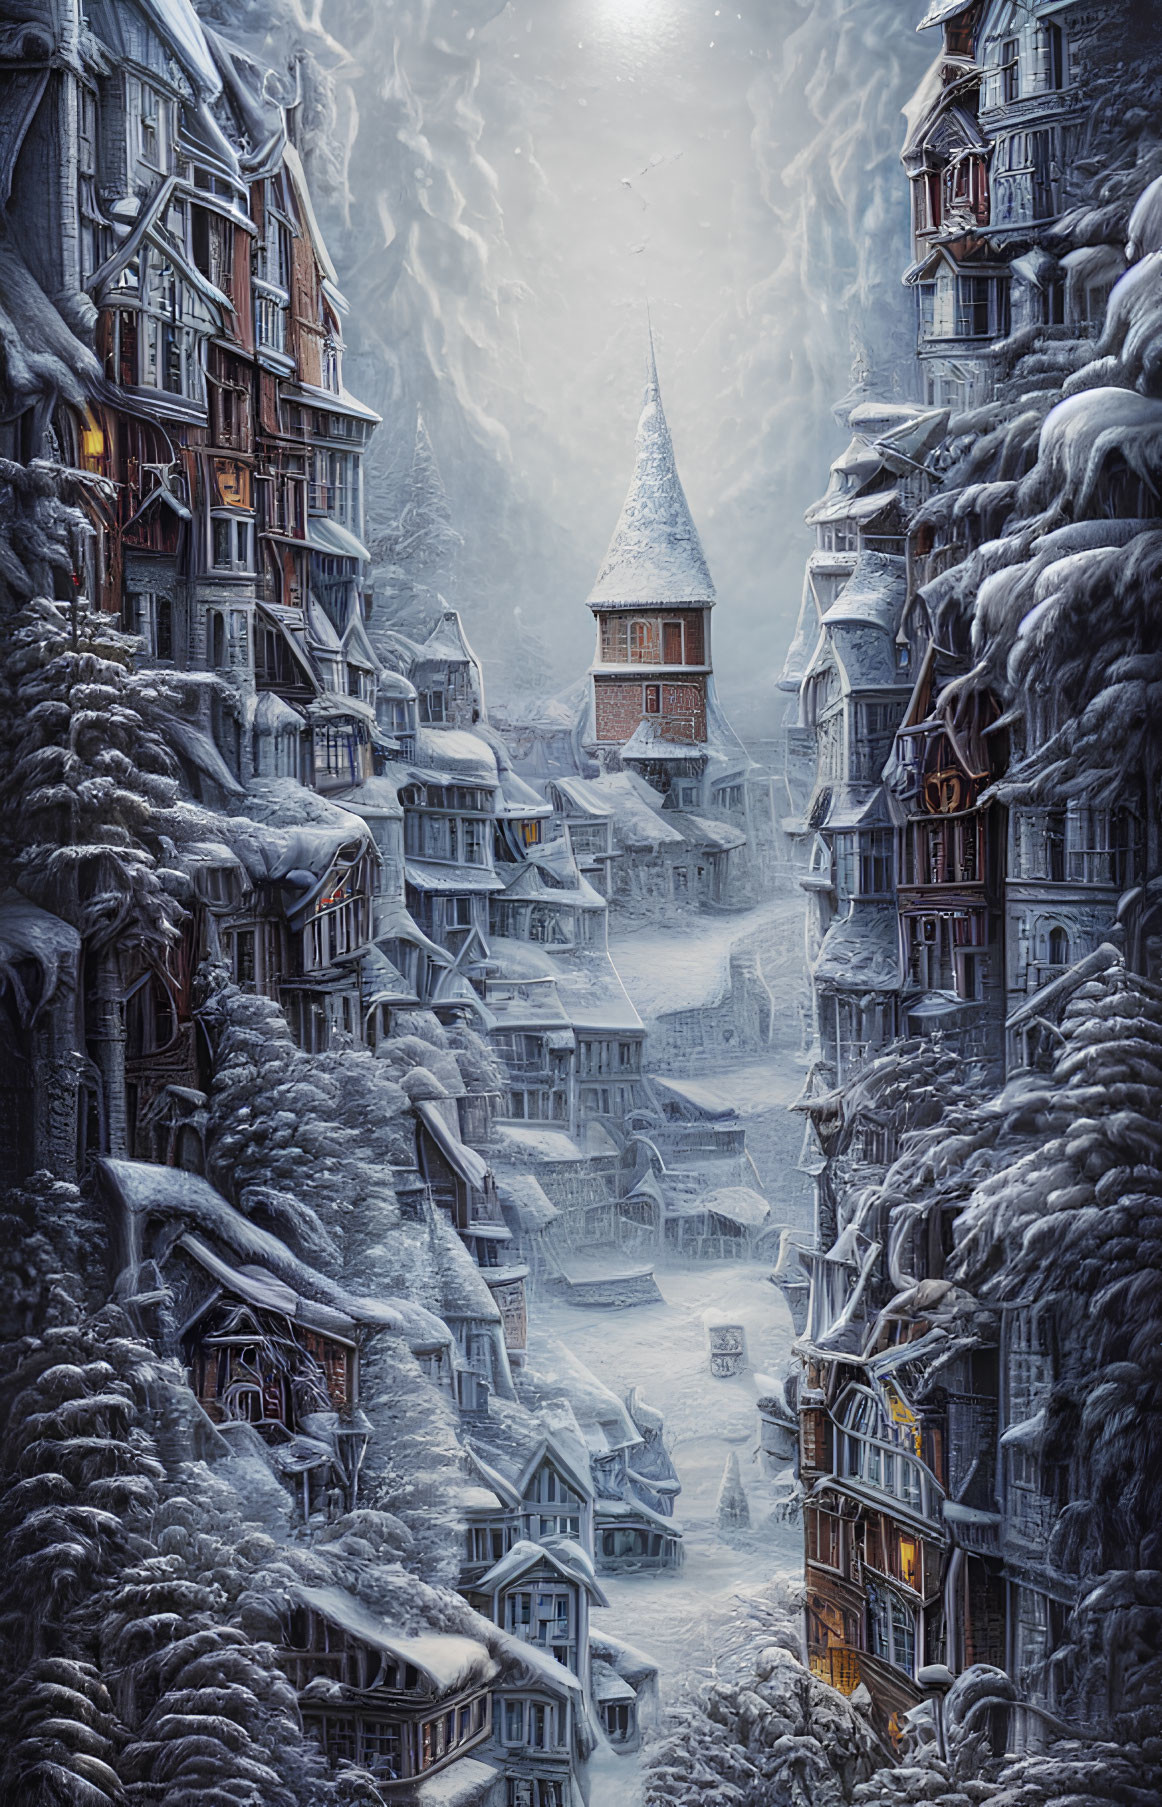 Snowy fantasy village with towering houses and clock tower under winter sky